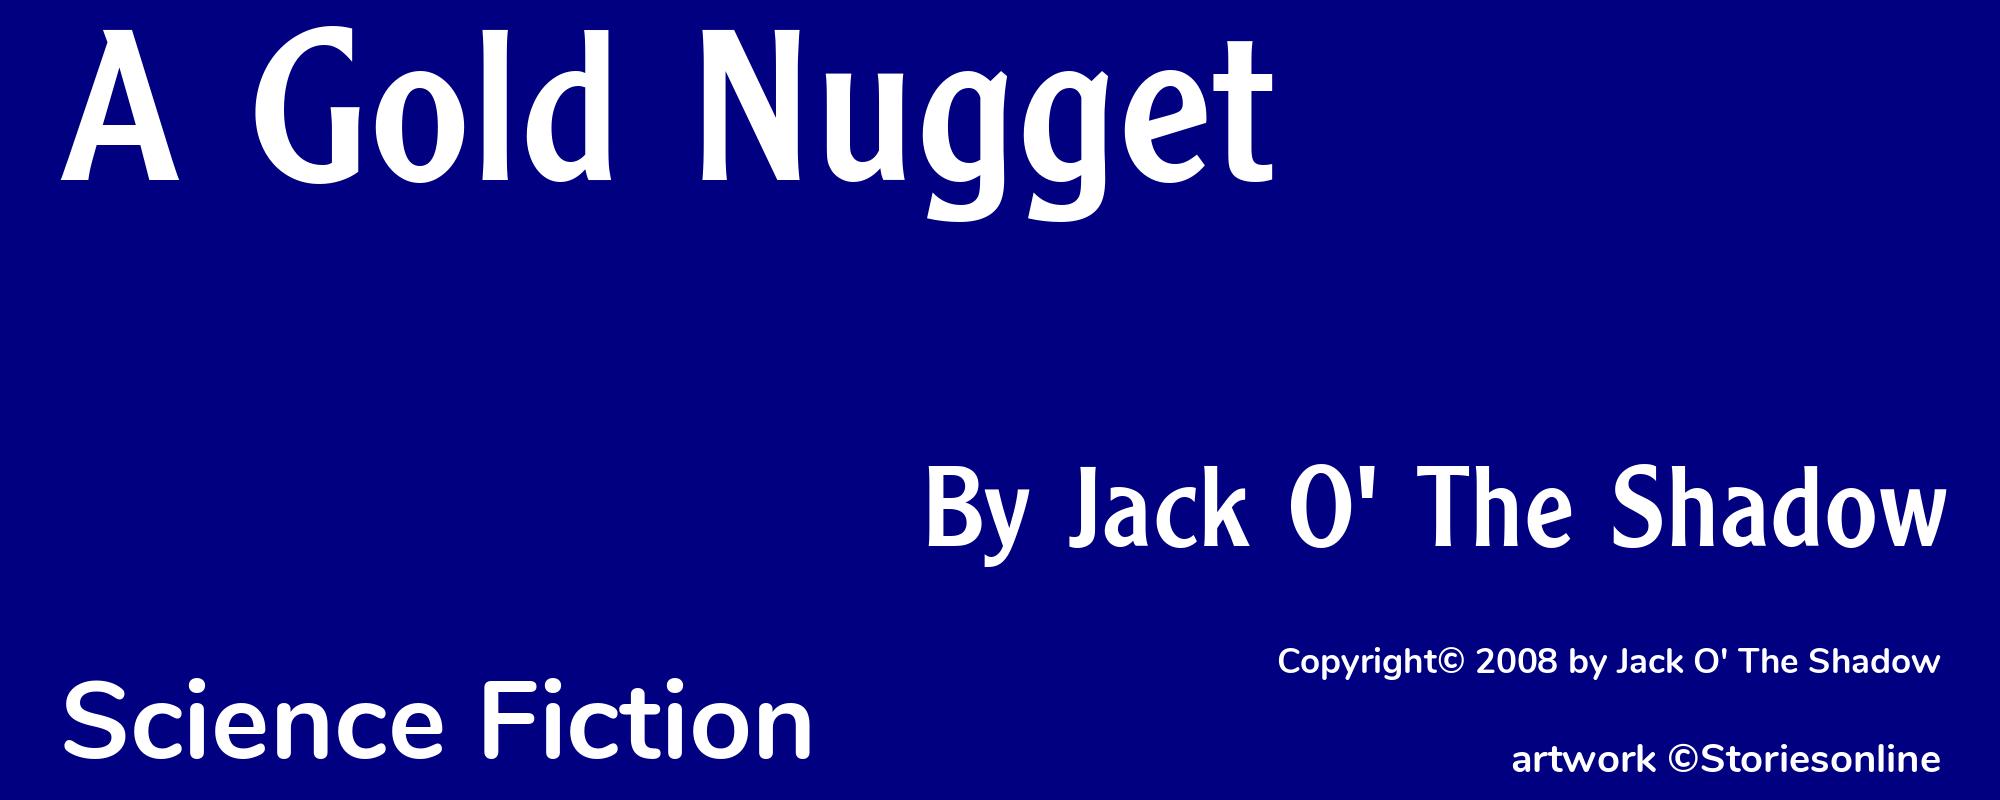 A Gold Nugget - Cover